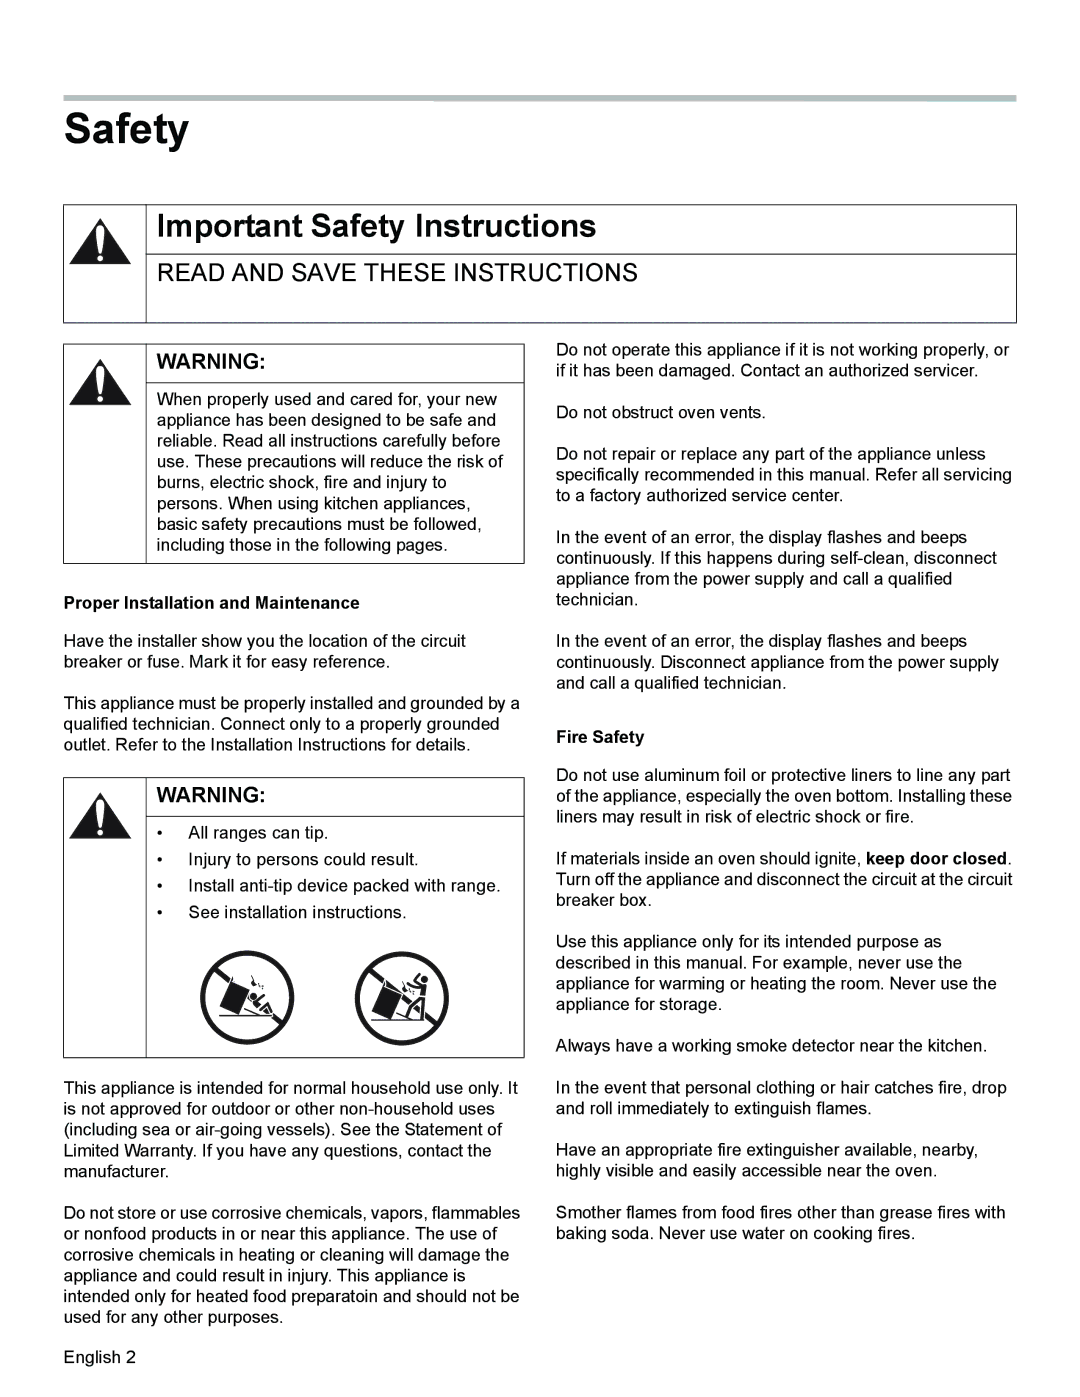 Bosch Appliances HES3023U manual Important Safety Instructions, Proper Installation and Maintenance, Fire Safety 